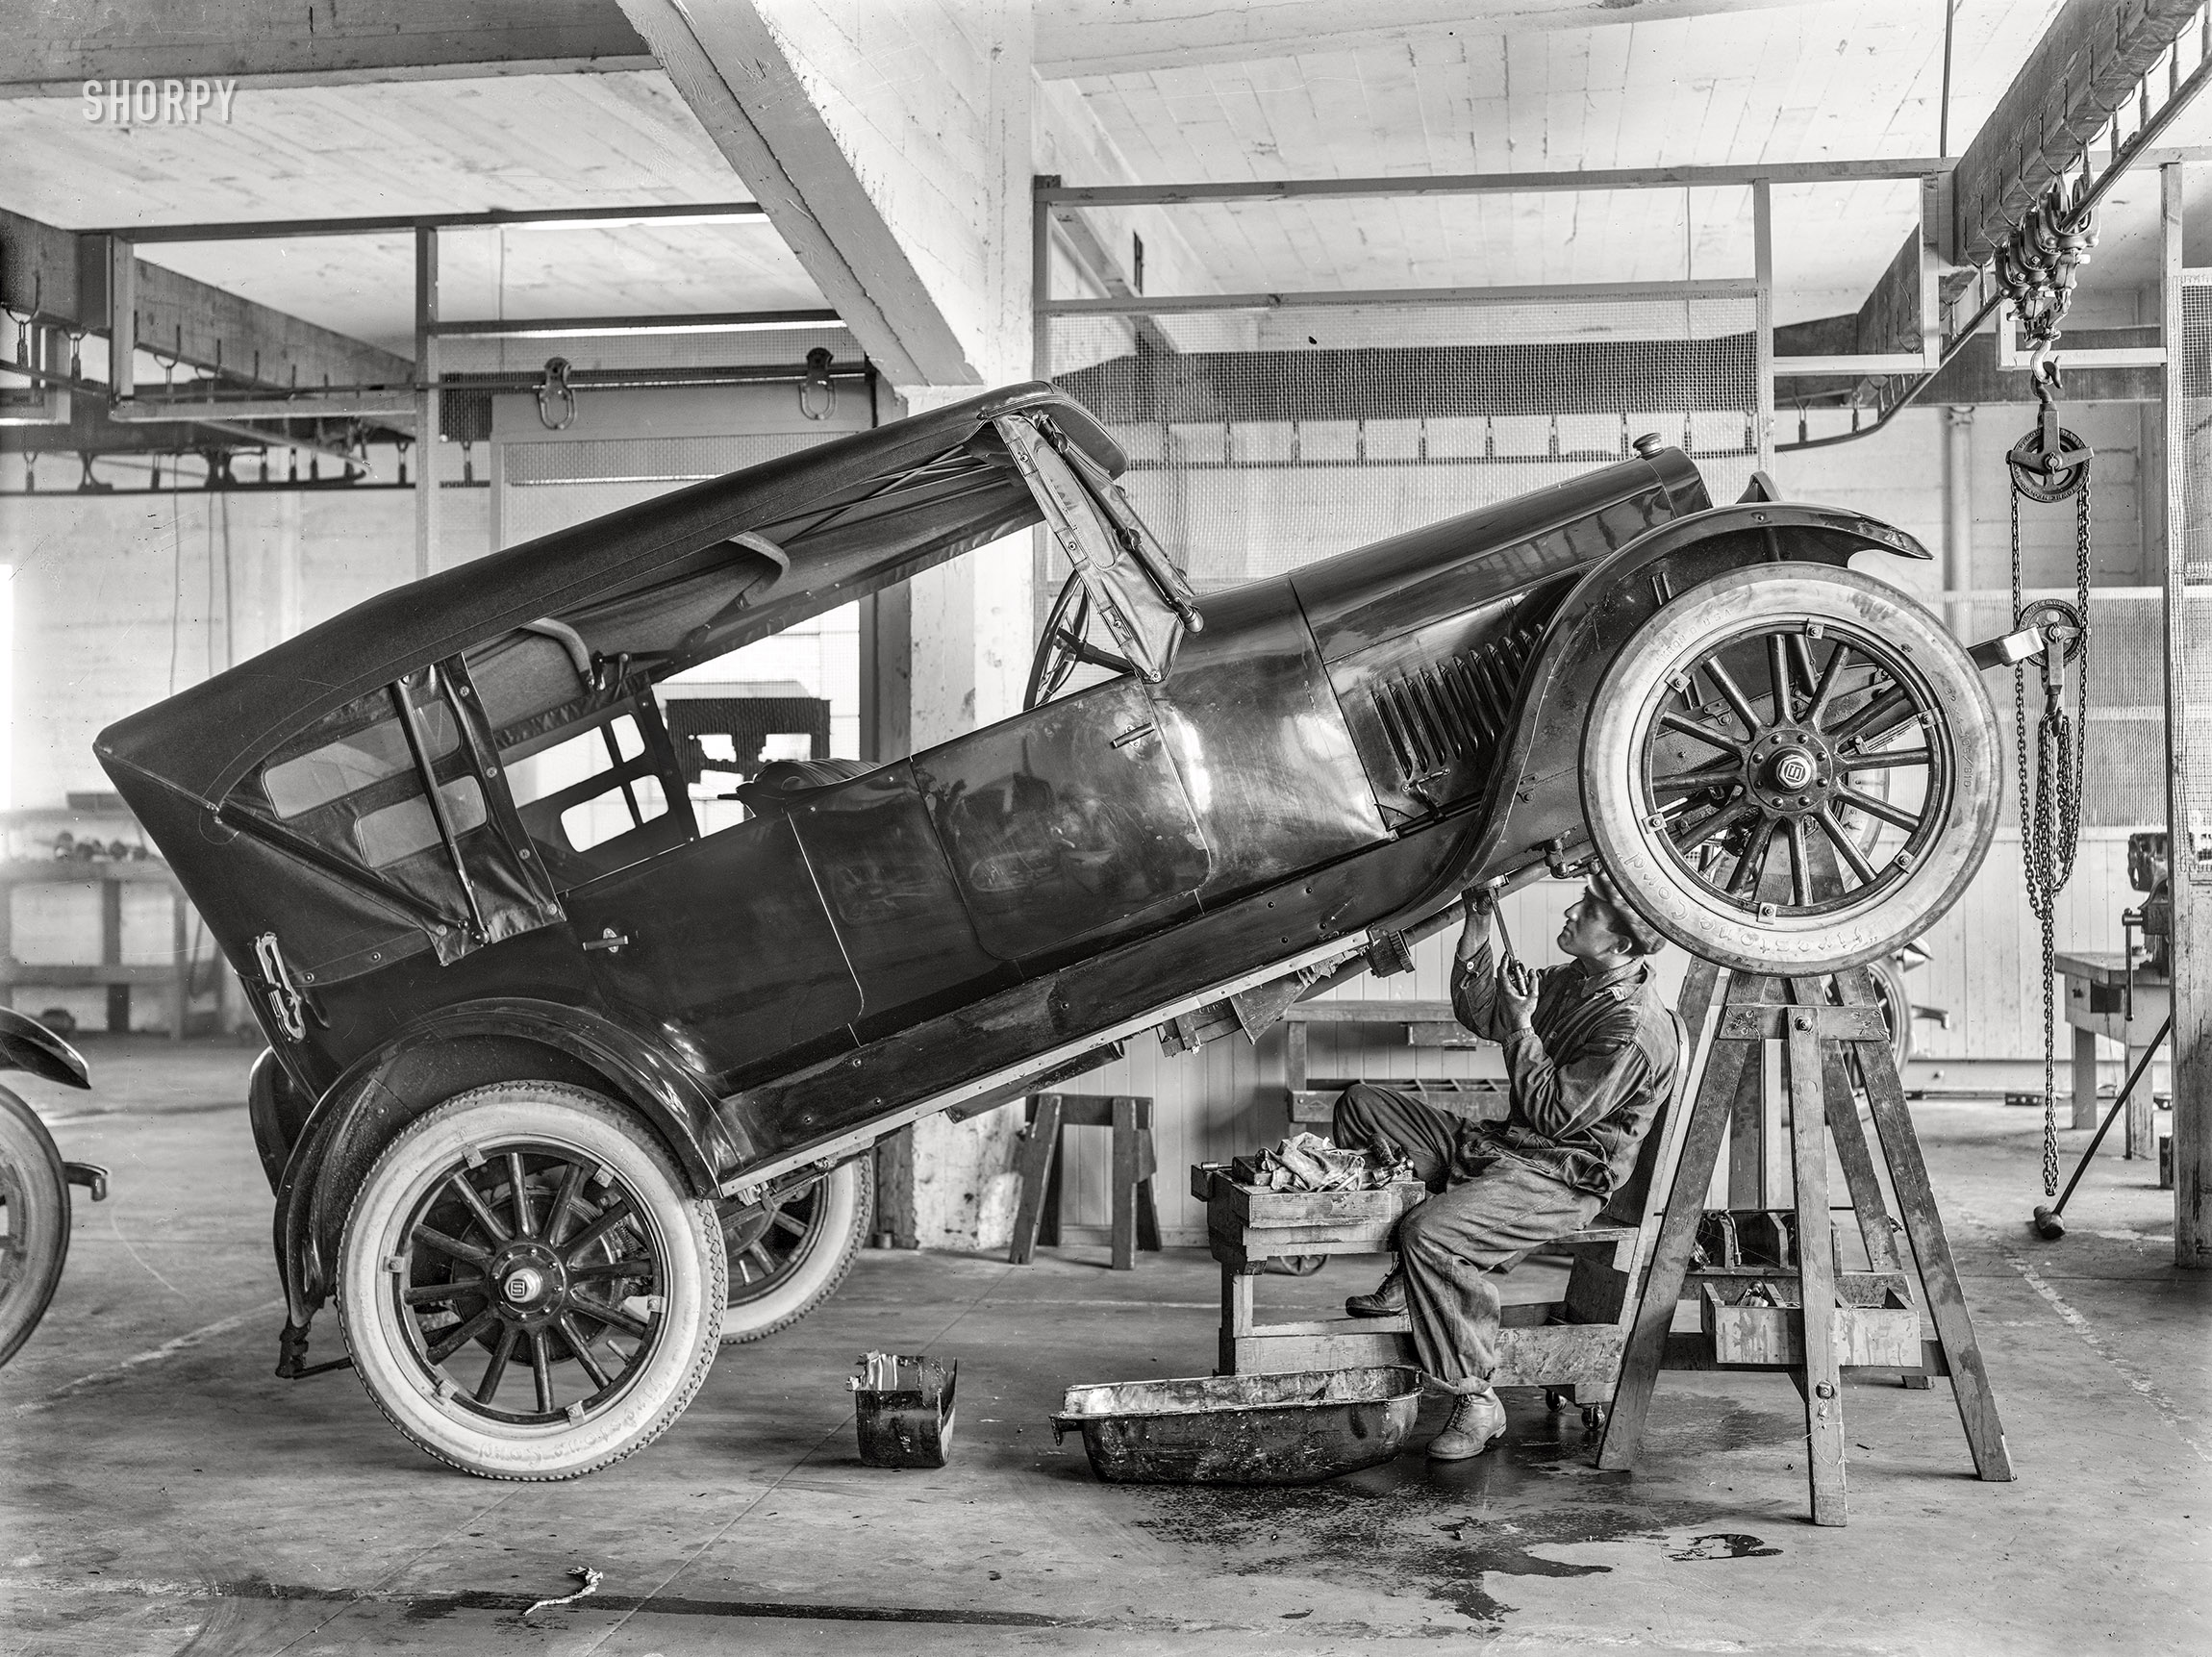 San Francisco circa 1915. "Studebaker motor car in repair shop with garage mechanic." Don't try this at home. Or at work. 6.5 x 8.5 inch glass negative from the Wyland Stanley collection of Bay Area historical memorabilia. View full size.